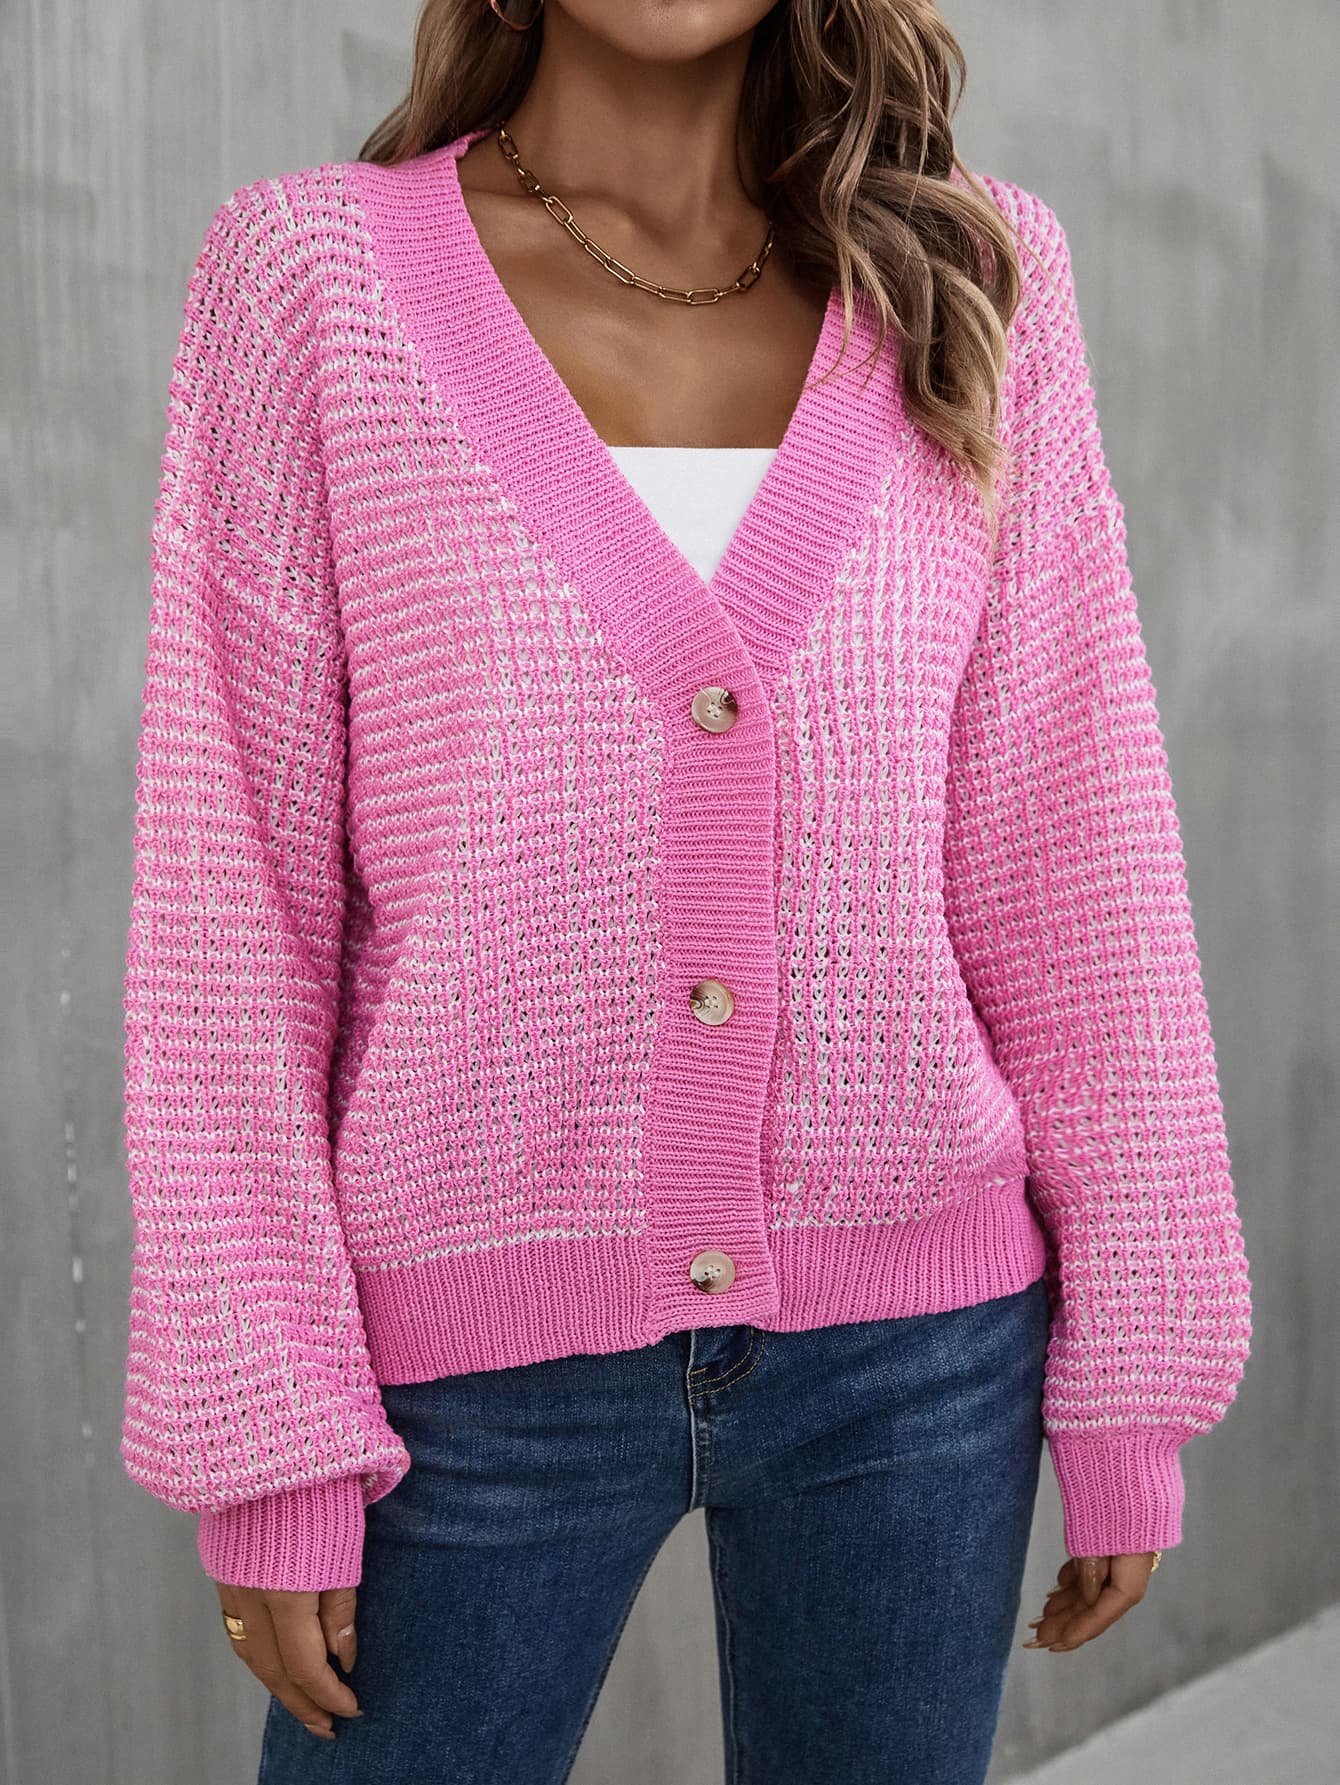 V-Neck Dropped Shoulder Cardigan - Pink / S - Women’s Clothing & Accessories - Shirts & Tops - 1 - 2024